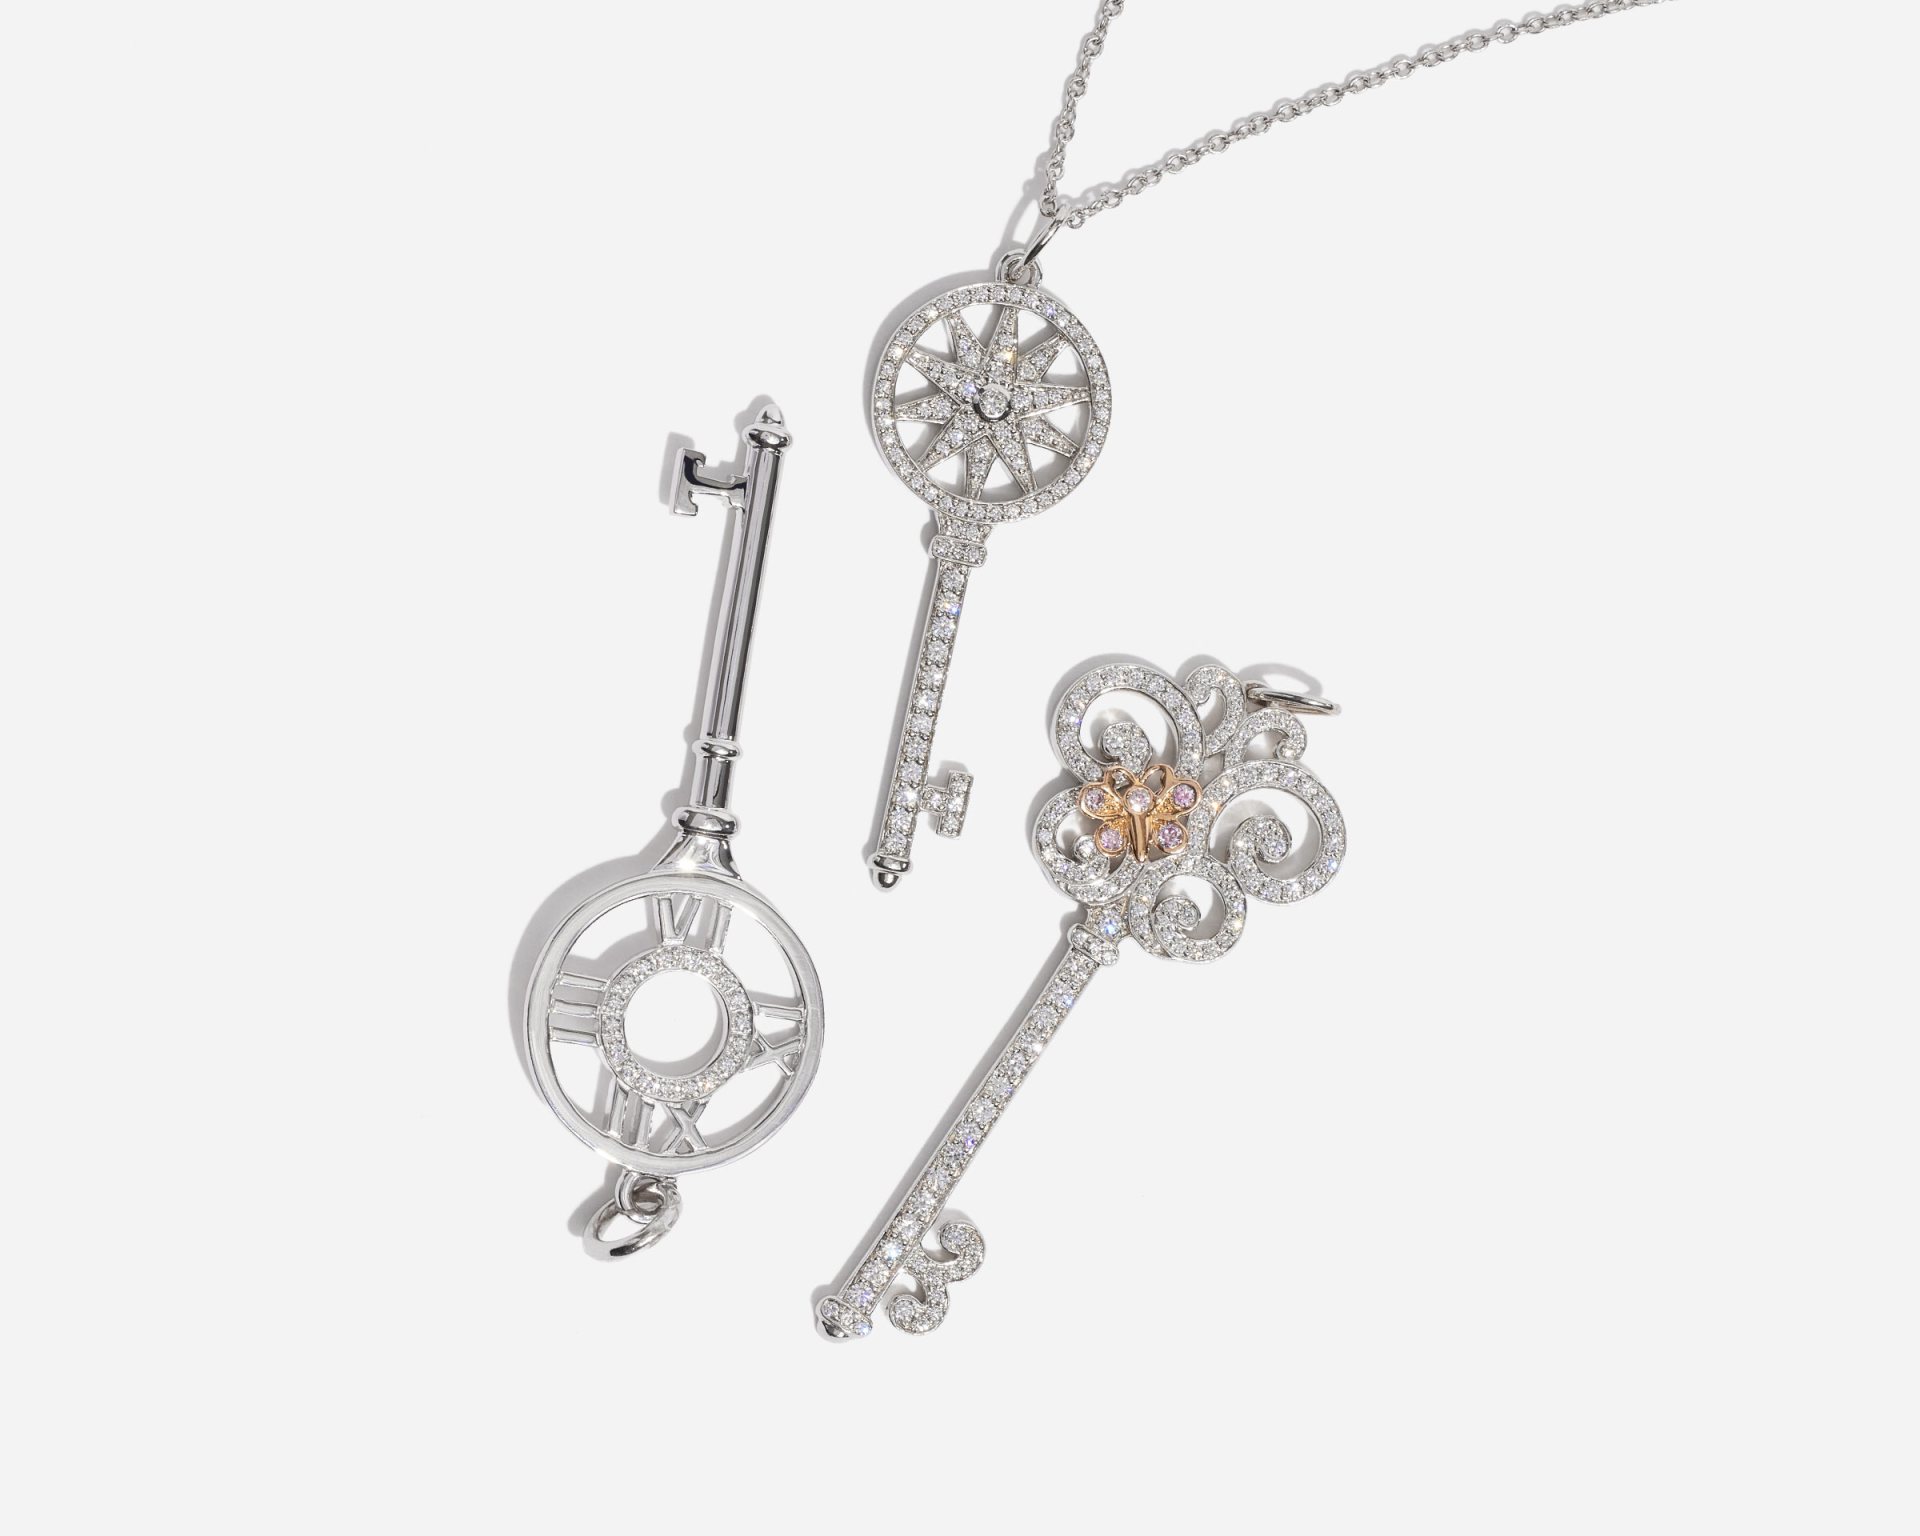 Key Pendant Necklace and Their Meaning